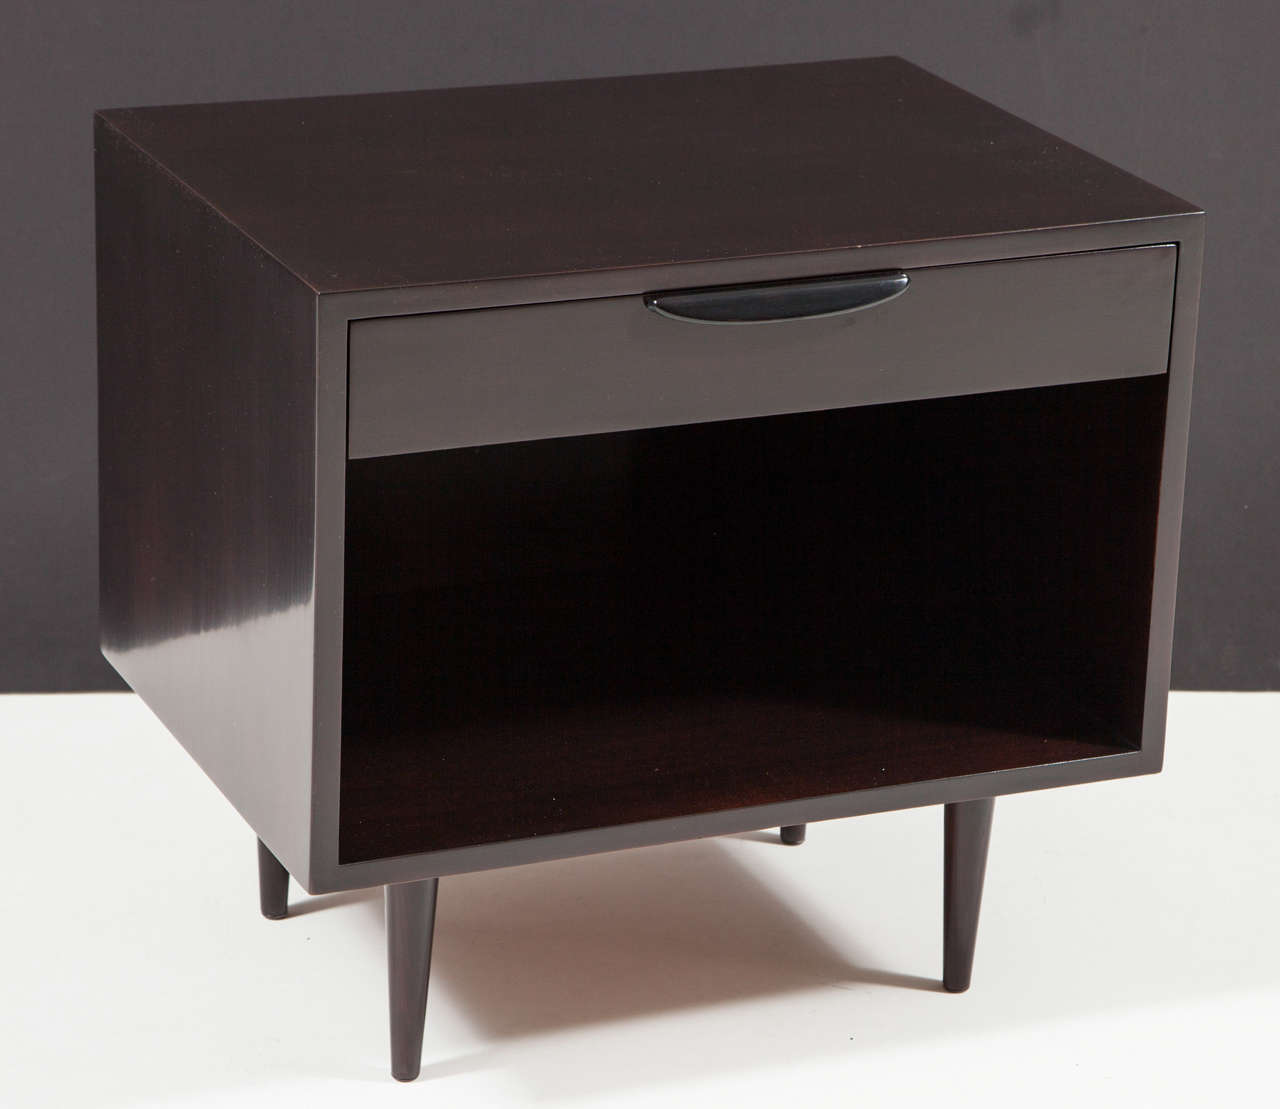 Classic pair of Mid Century nightstands in ebonized, dark chocolate brown solid mahogany with black lacquer pulls.  Refinished in a satin sheen finish.